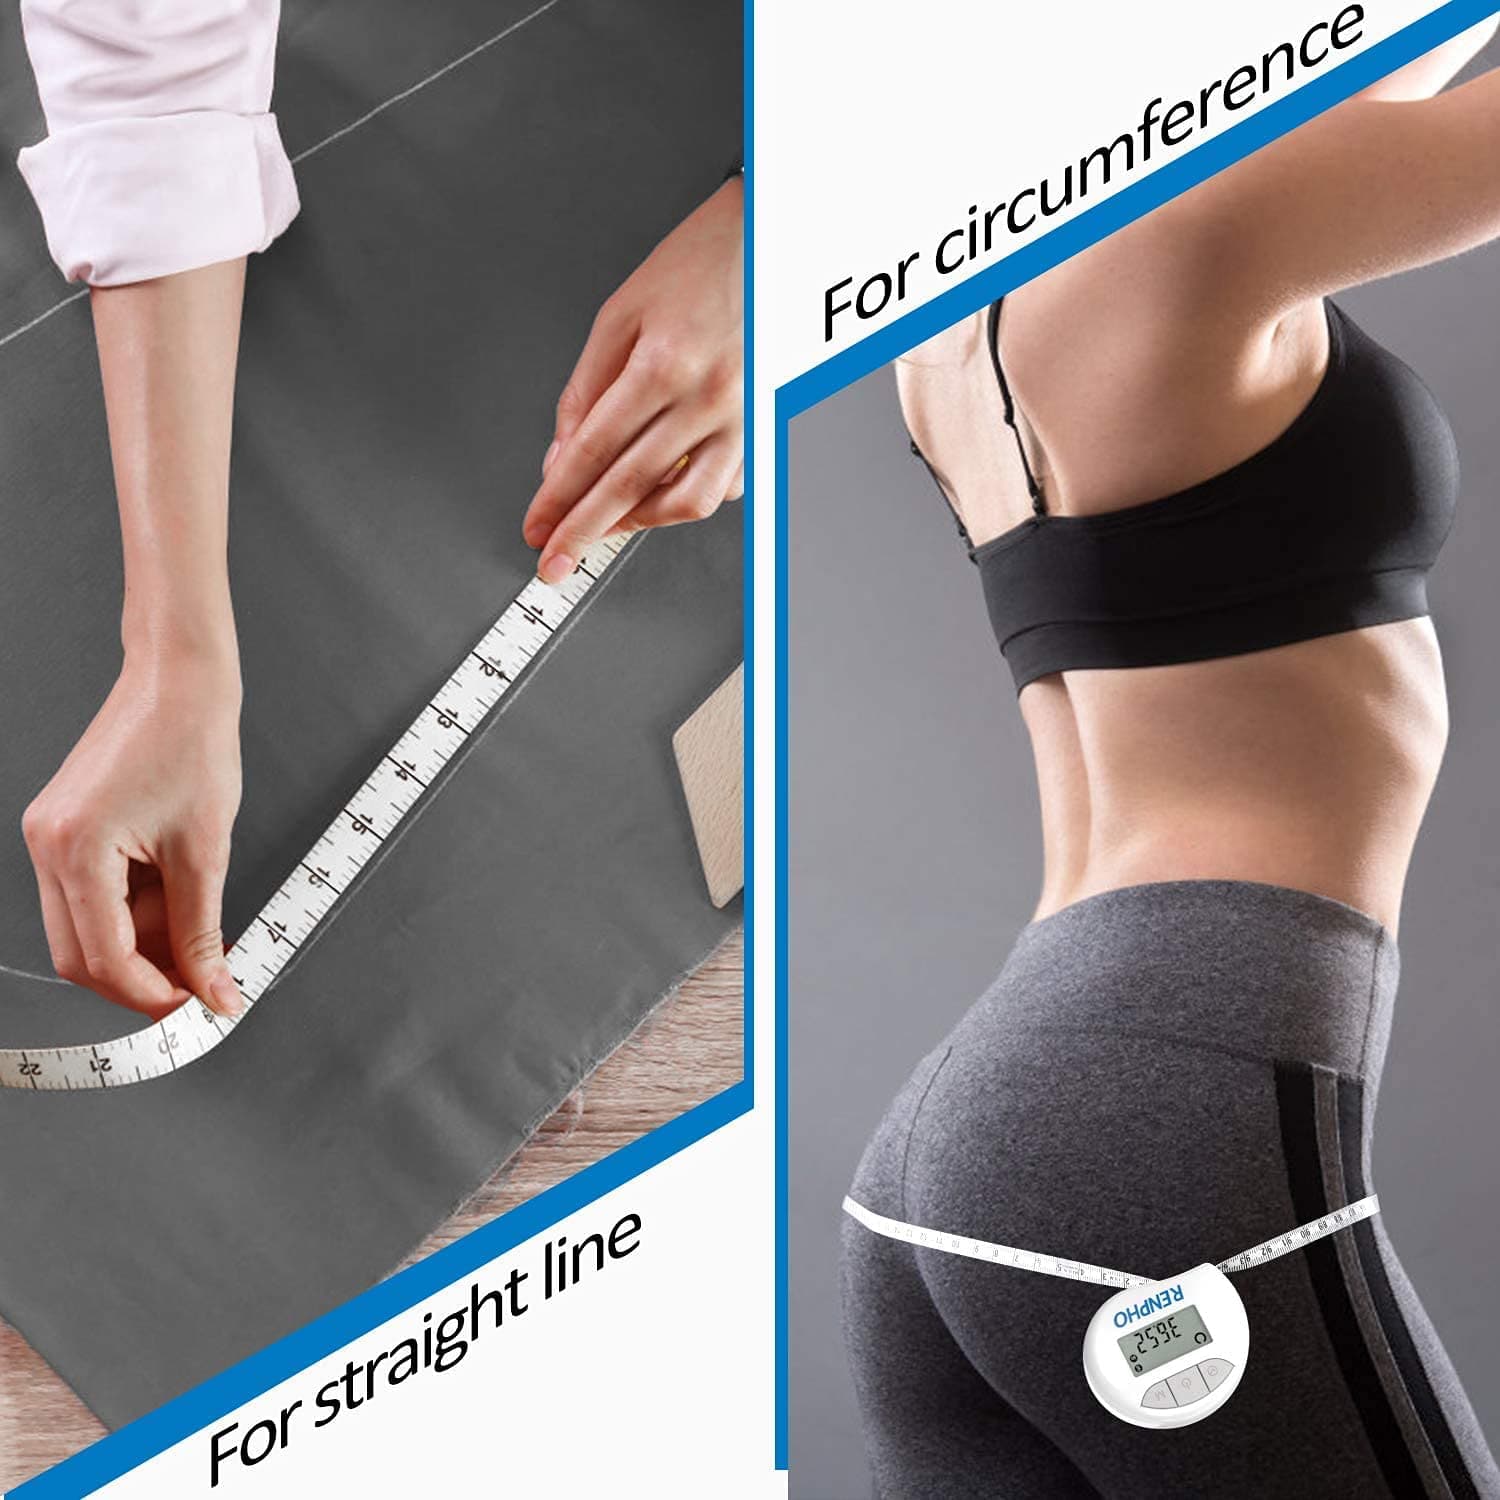 New Renpho Smart Tape Measure for body - health and beauty - by owner -  household sale - craigslist